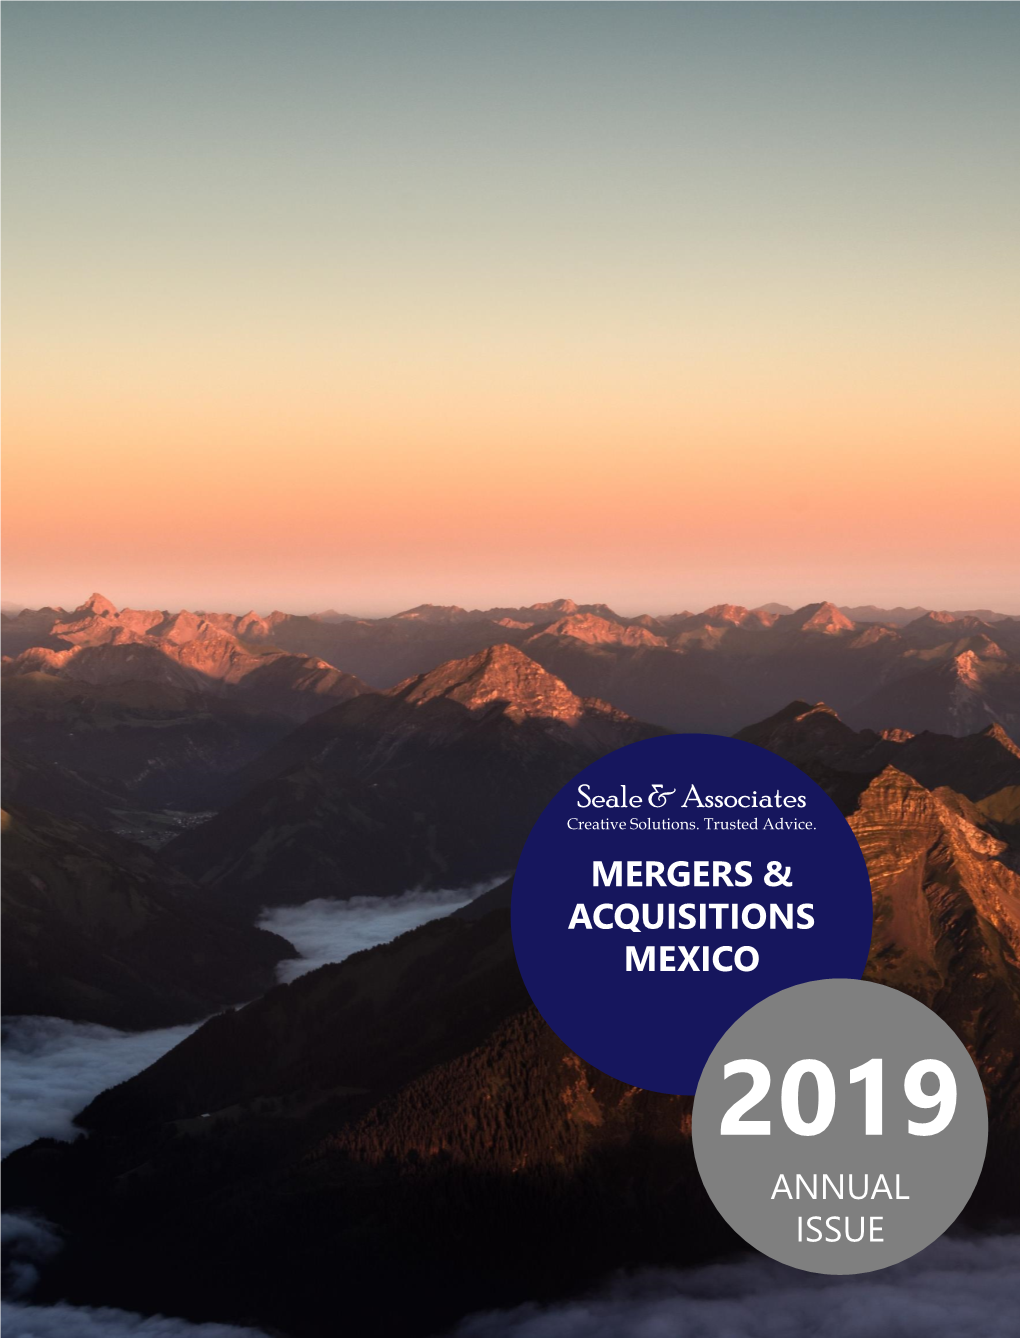 Mergers & Acquisitions Mexico Annual Issue